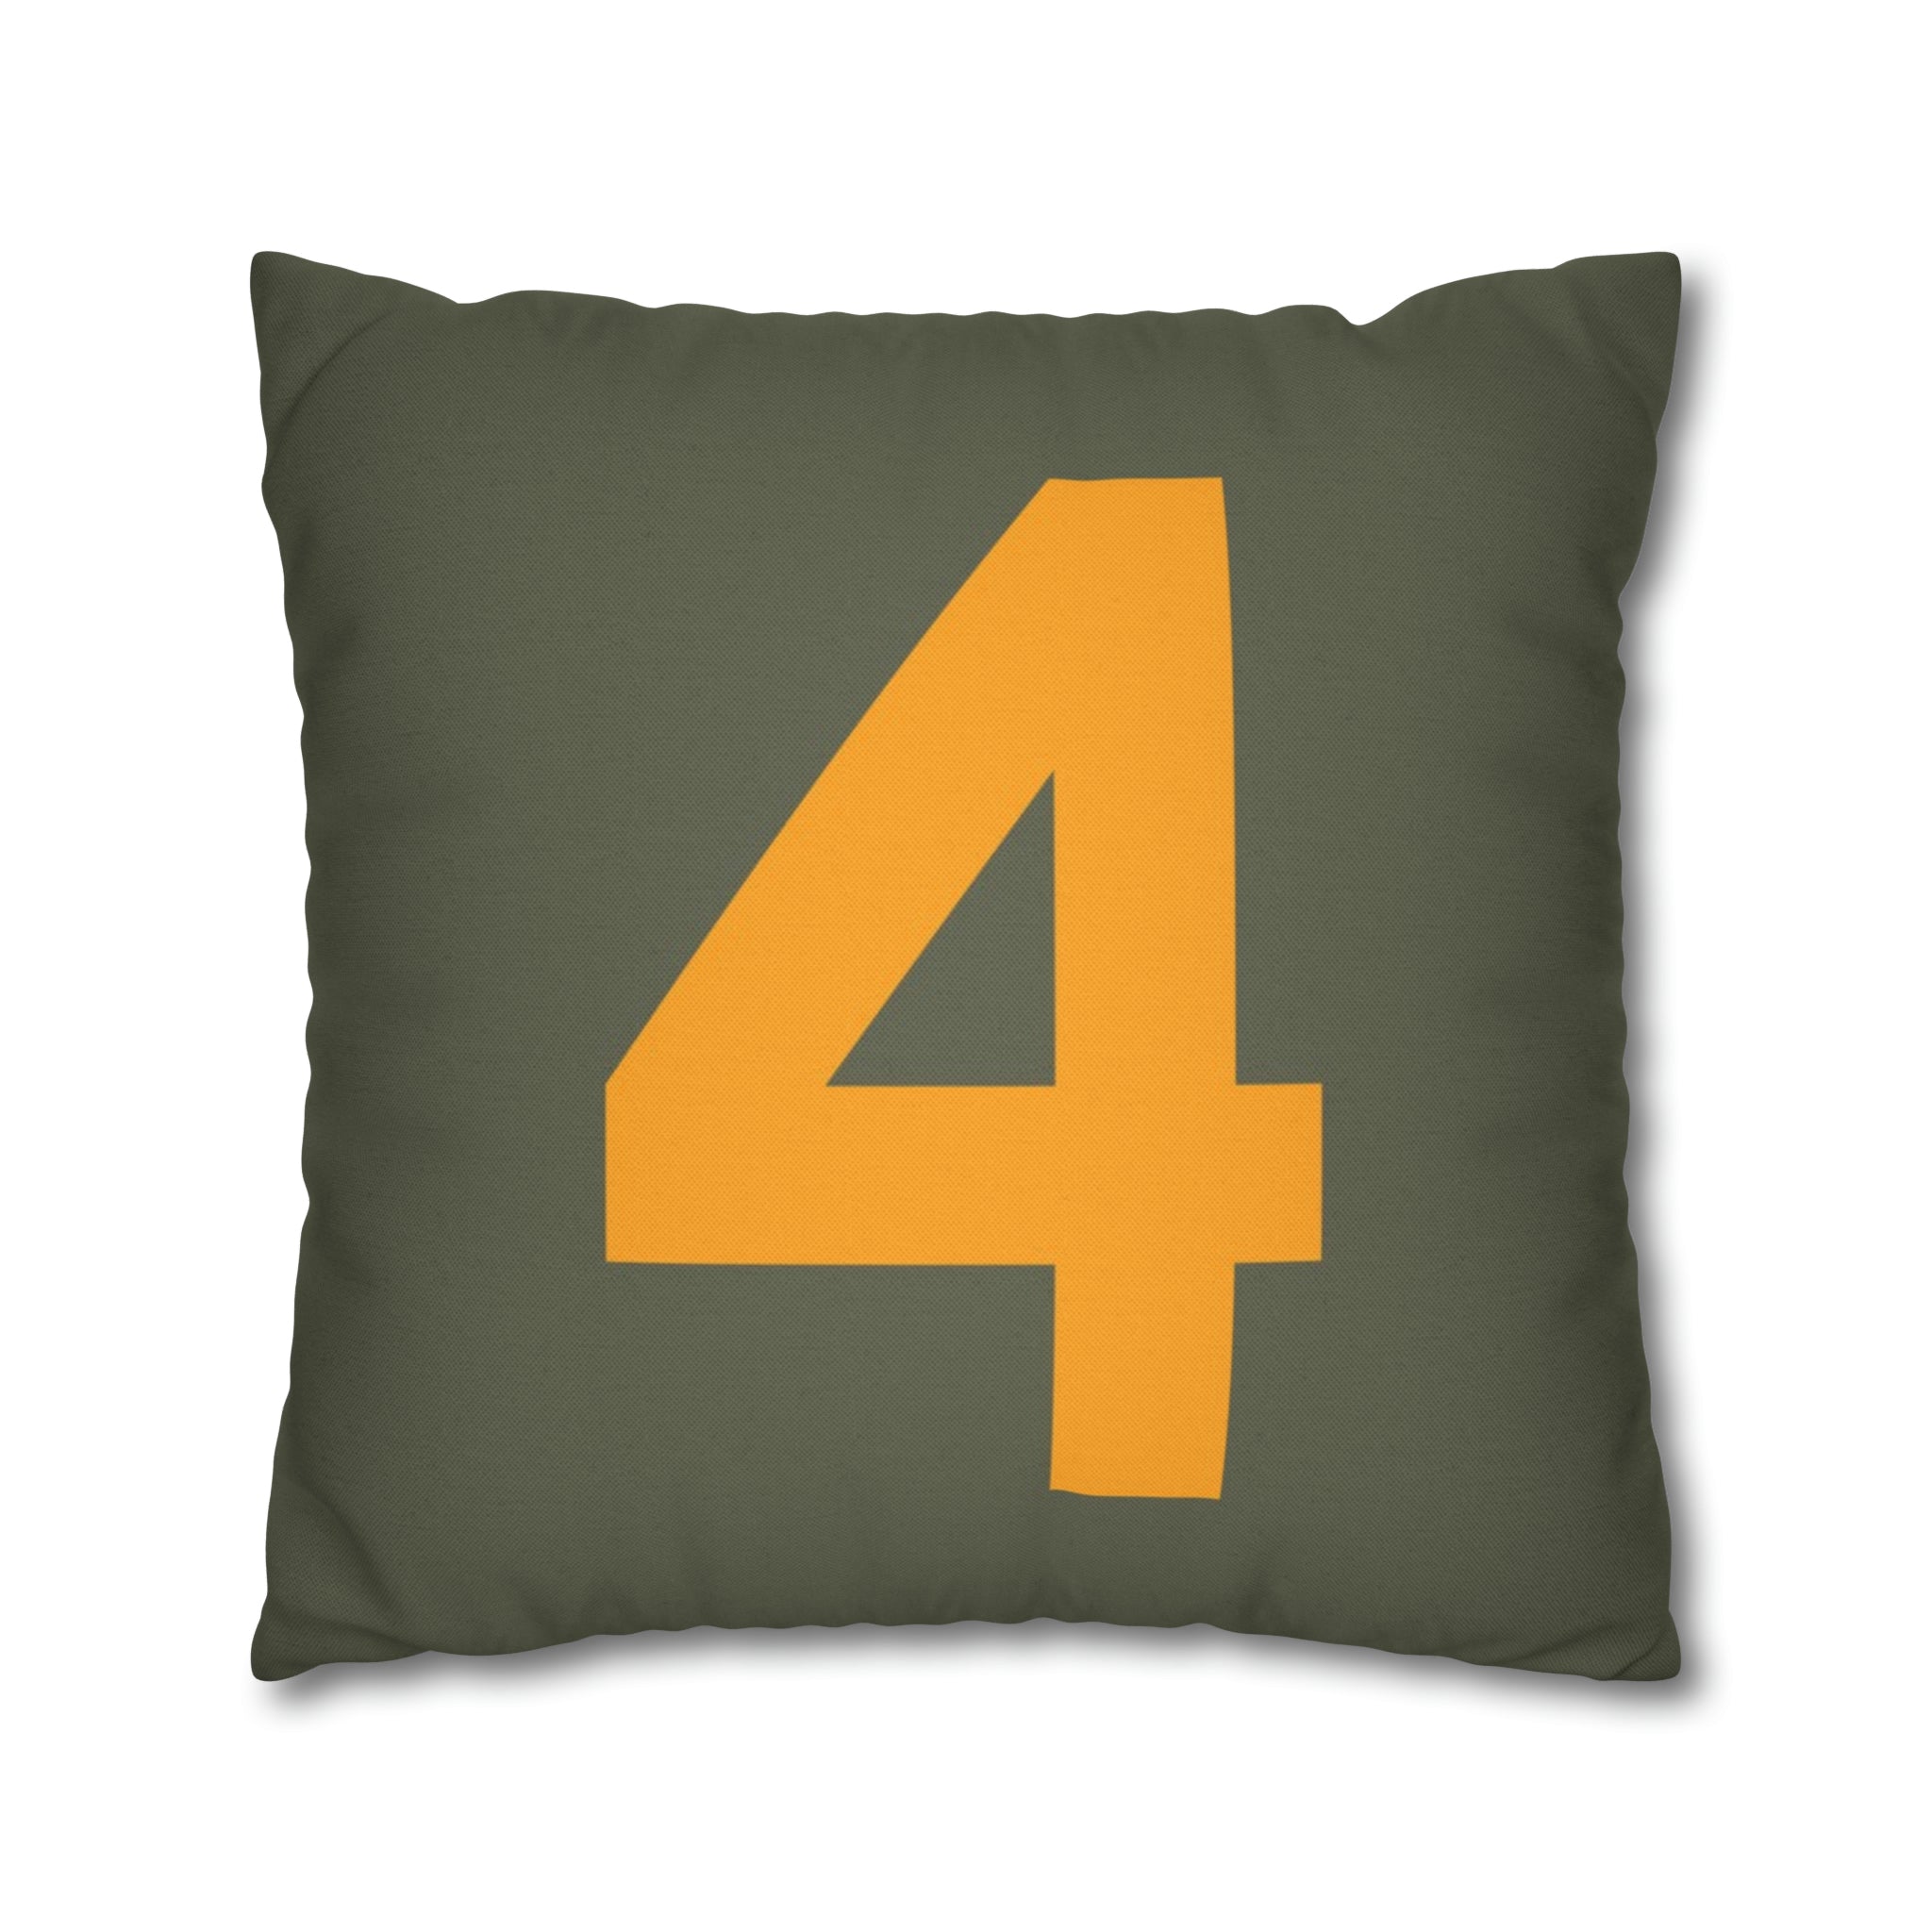 WWII USAAF Number "4" Square Pillowcase - I Love a Hangar